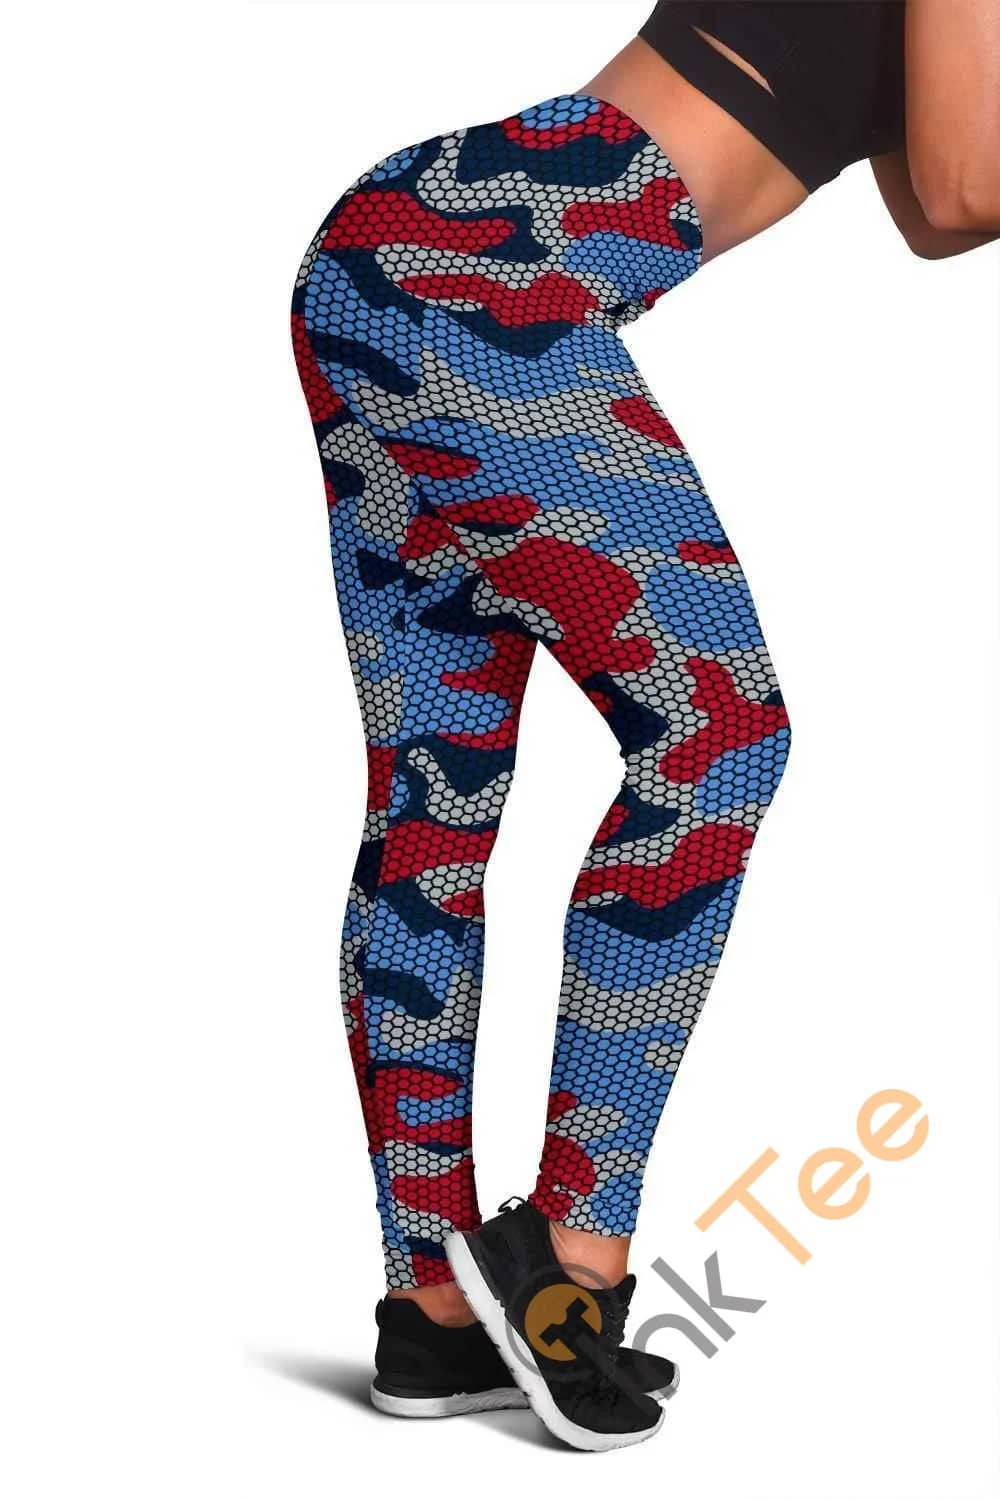 Tennessee Titans Inspired Hex Camo 3D All Over Print For Yoga Fitness Fashion Women's Leggings